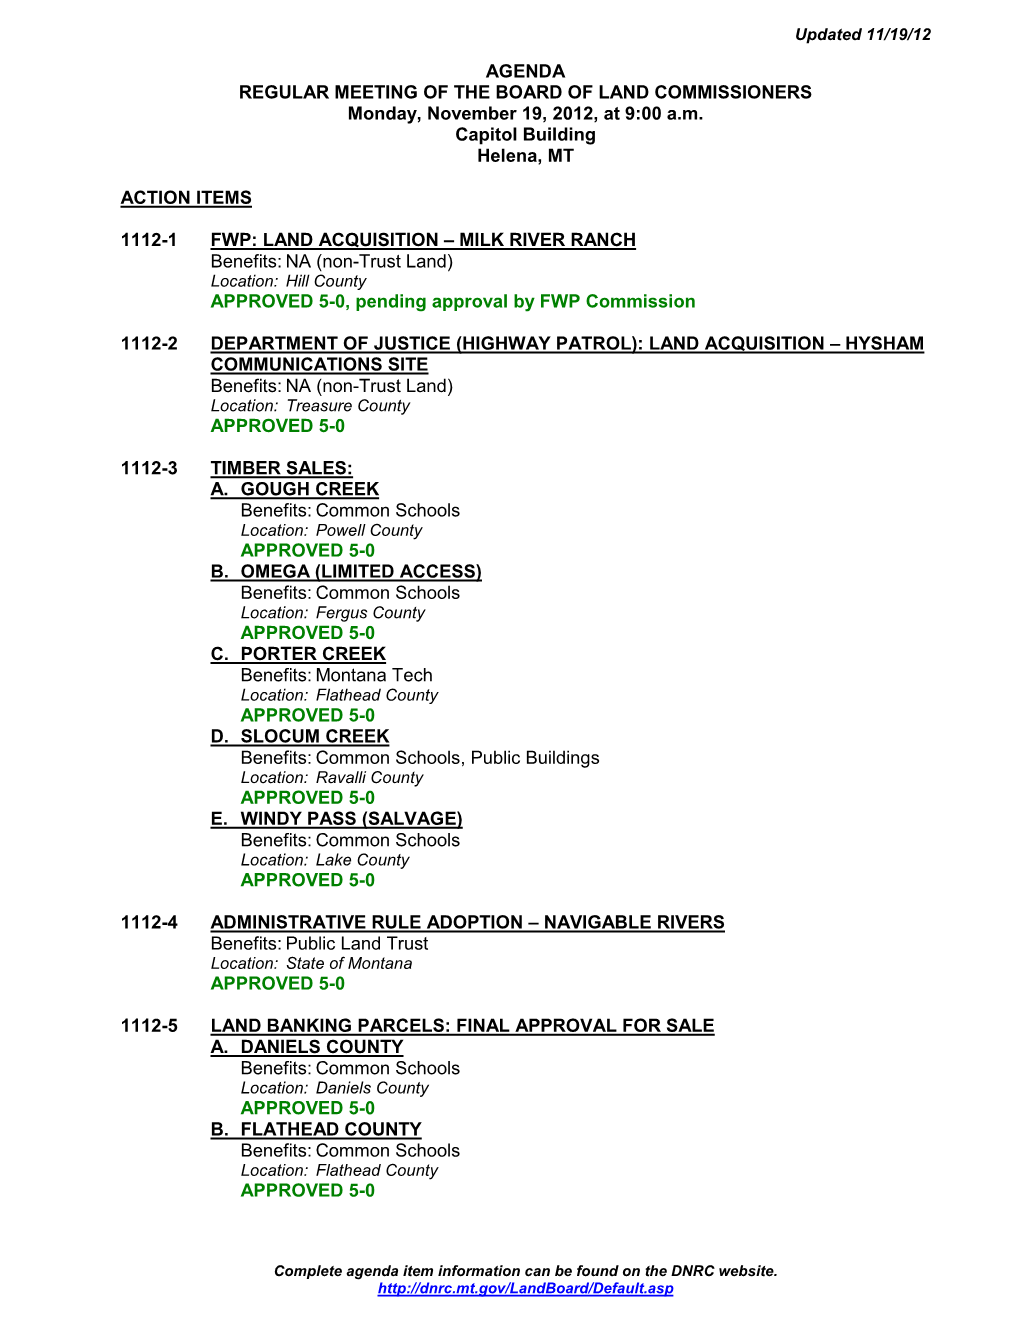 AGENDA REGULAR MEETING of the BOARD of LAND COMMISSIONERS Monday, November 19, 2012, at 9:00 A.M